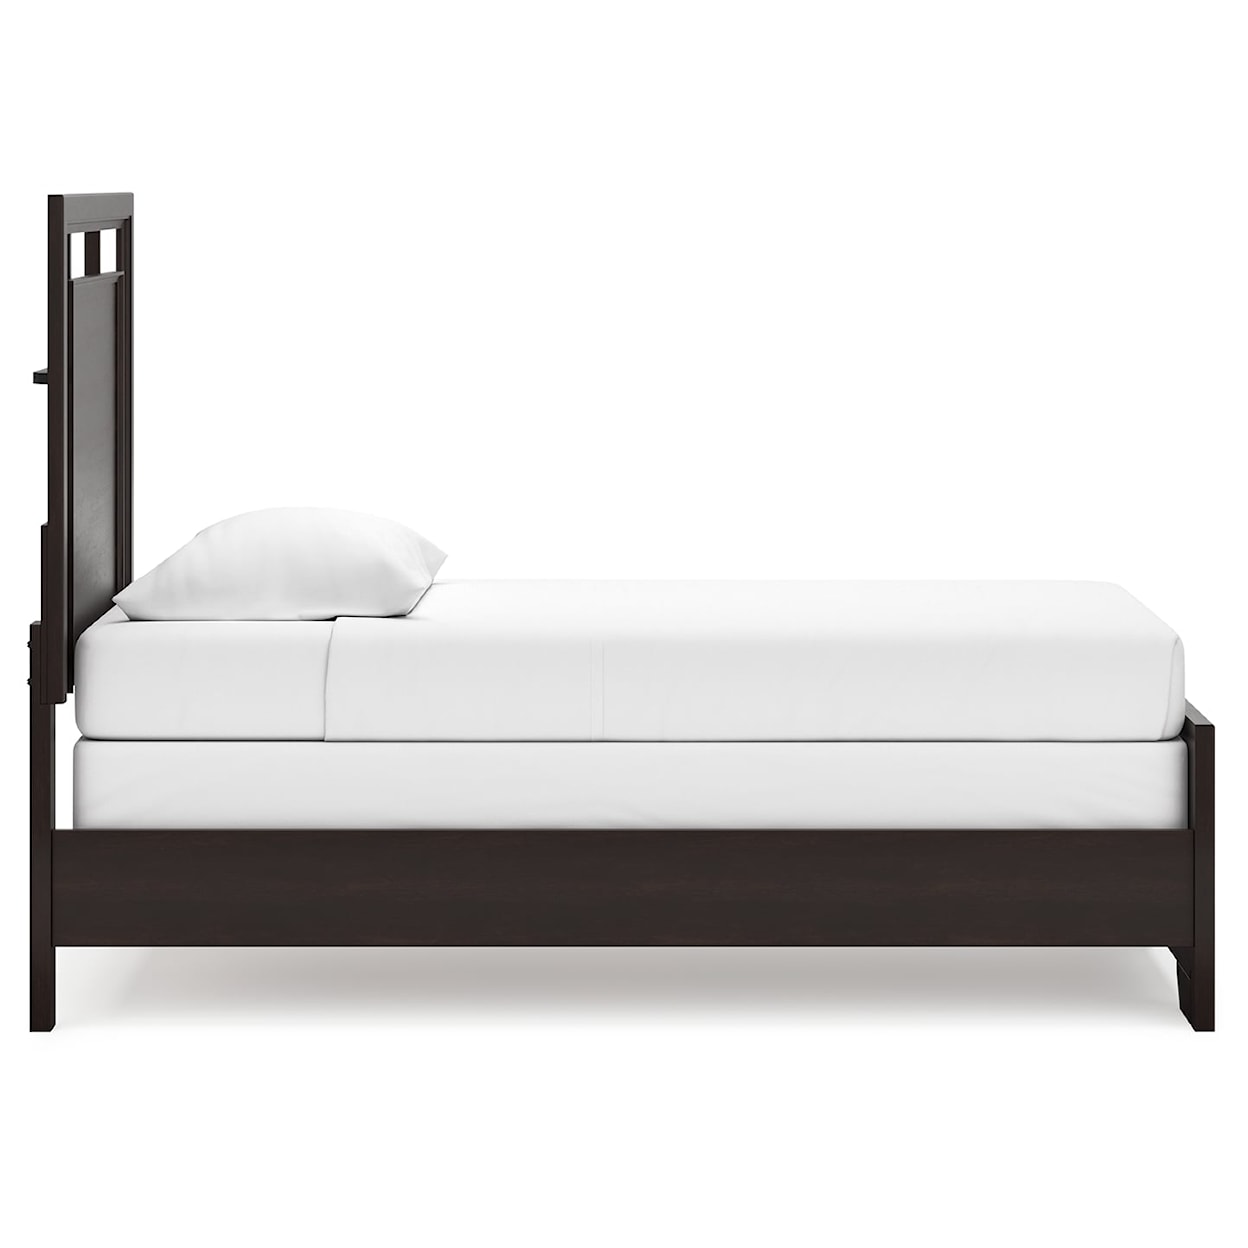 Benchcraft Covetown Twin Panel Bed